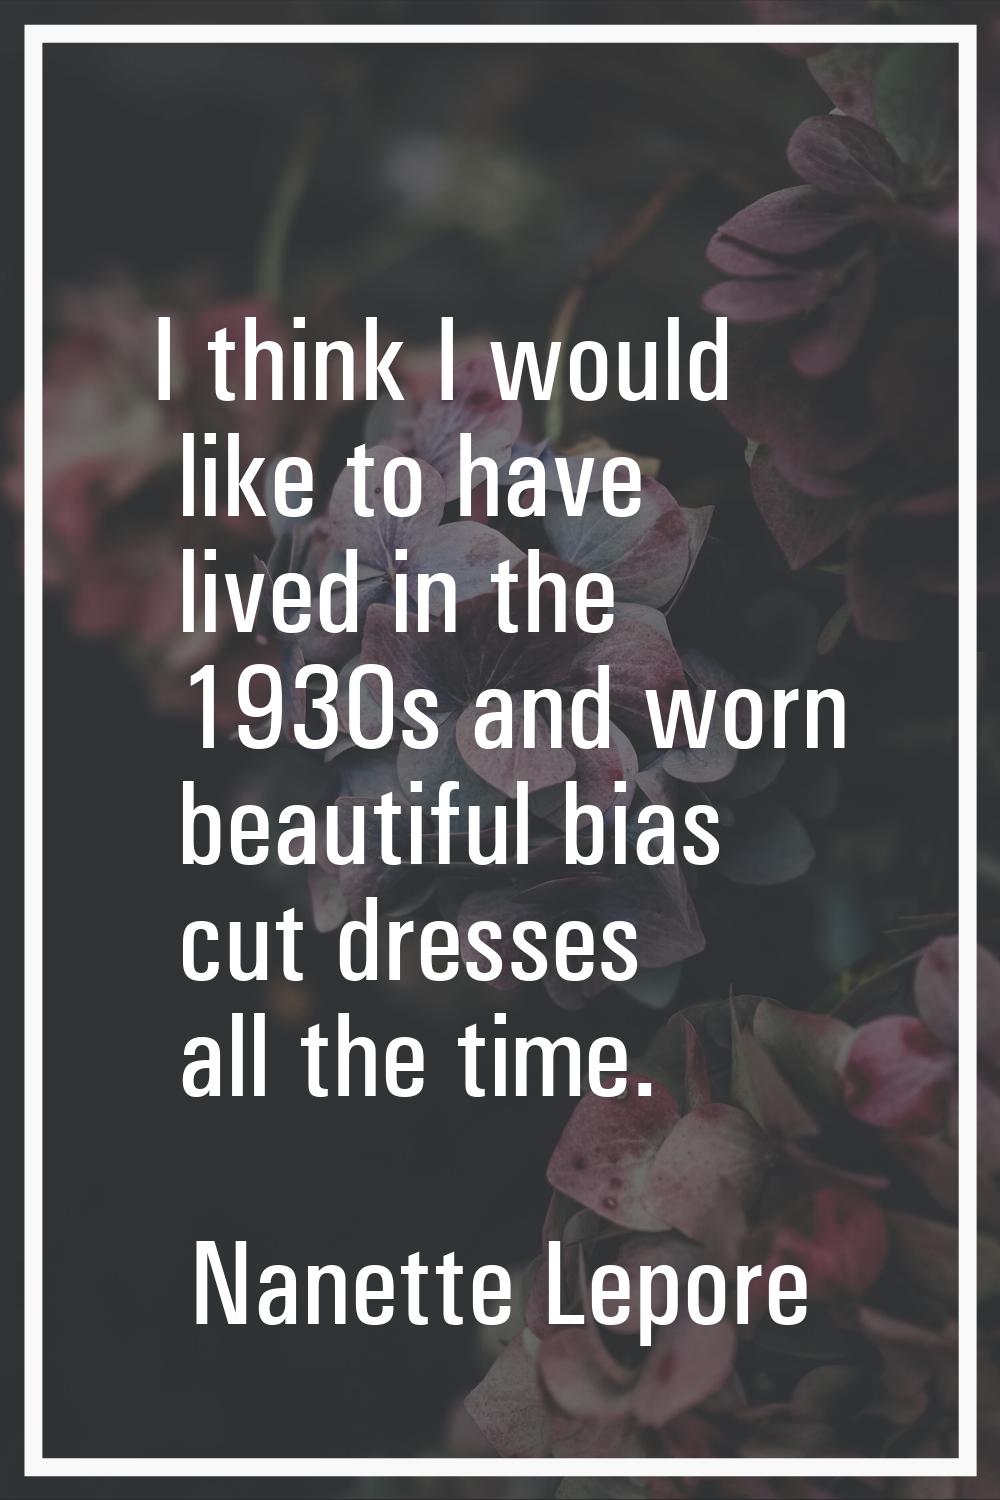 I think I would like to have lived in the 1930s and worn beautiful bias cut dresses all the time.